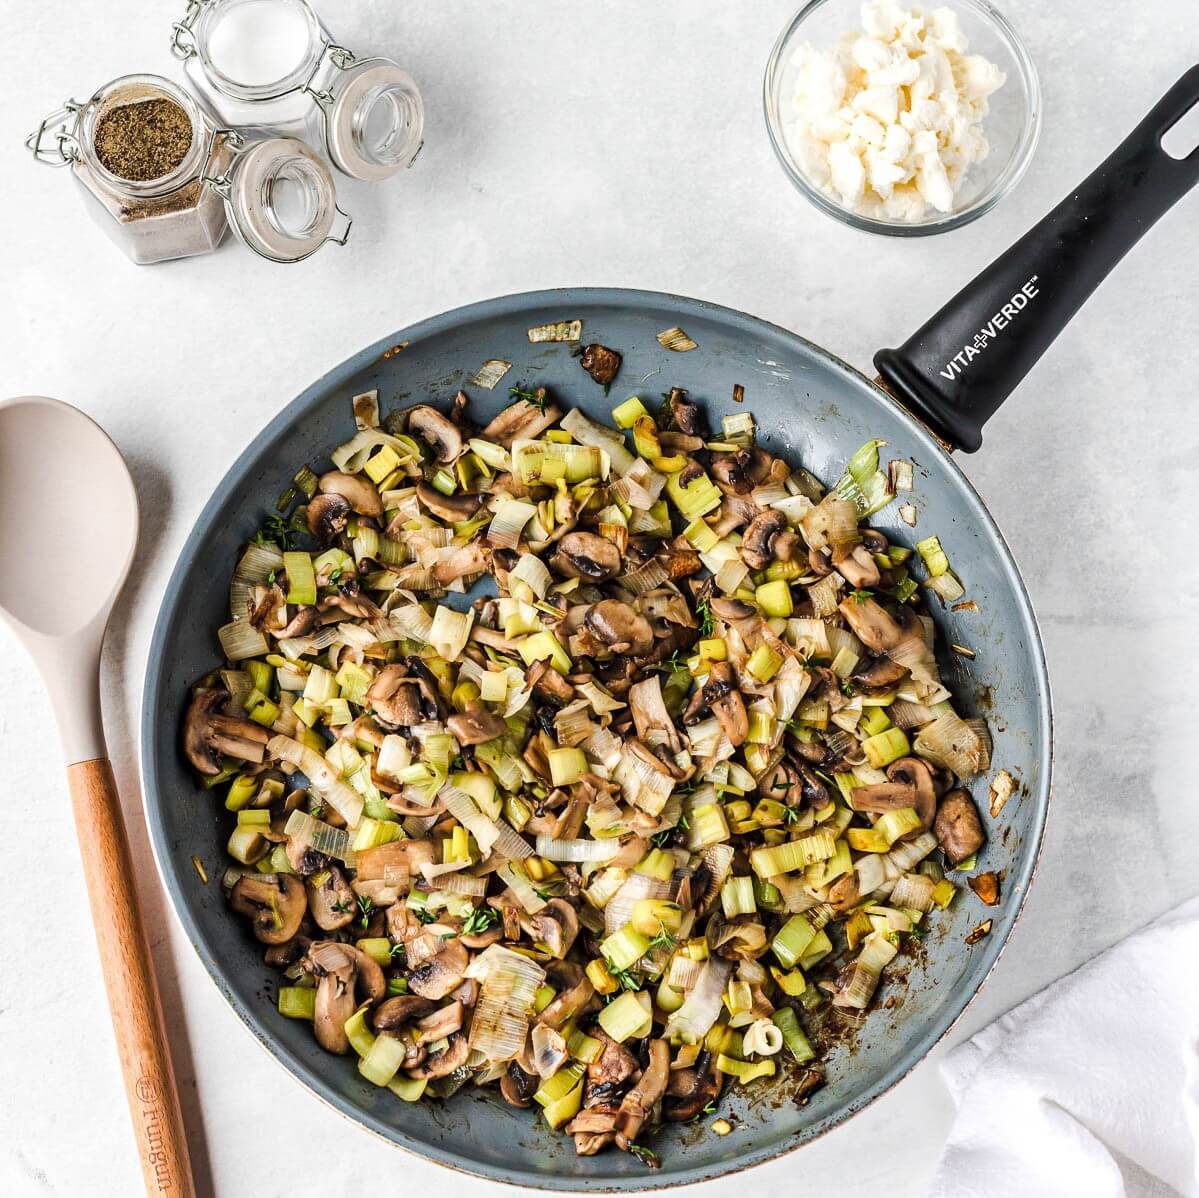 A frying pan filled with chopped leeks and mushrooms.